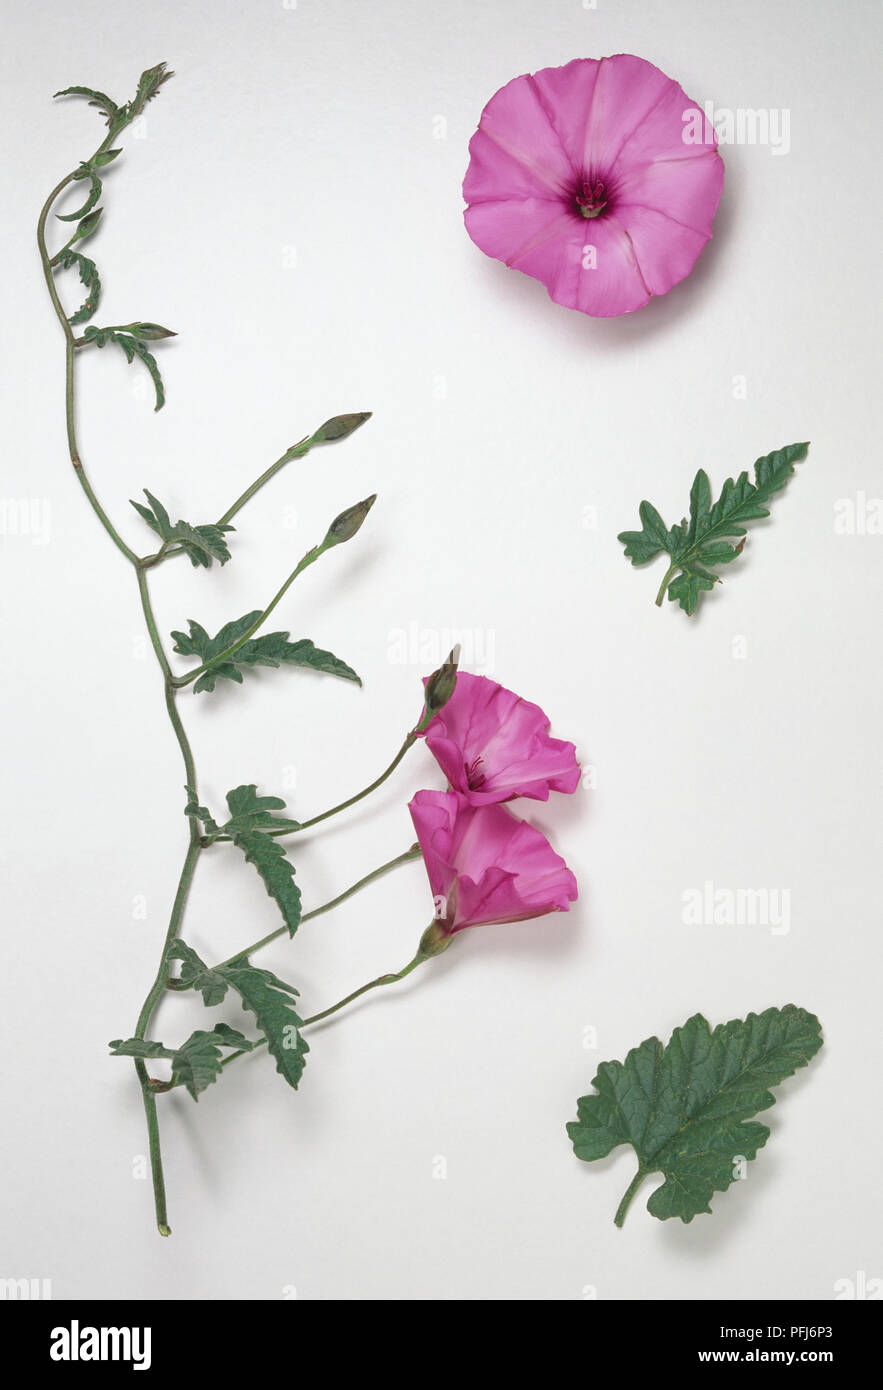 Convolvulus althaeoides (Mallow-leaved bindweed), stem with buds, flowers and leaves, and separate flower head and leaves, close-up Stock Photo